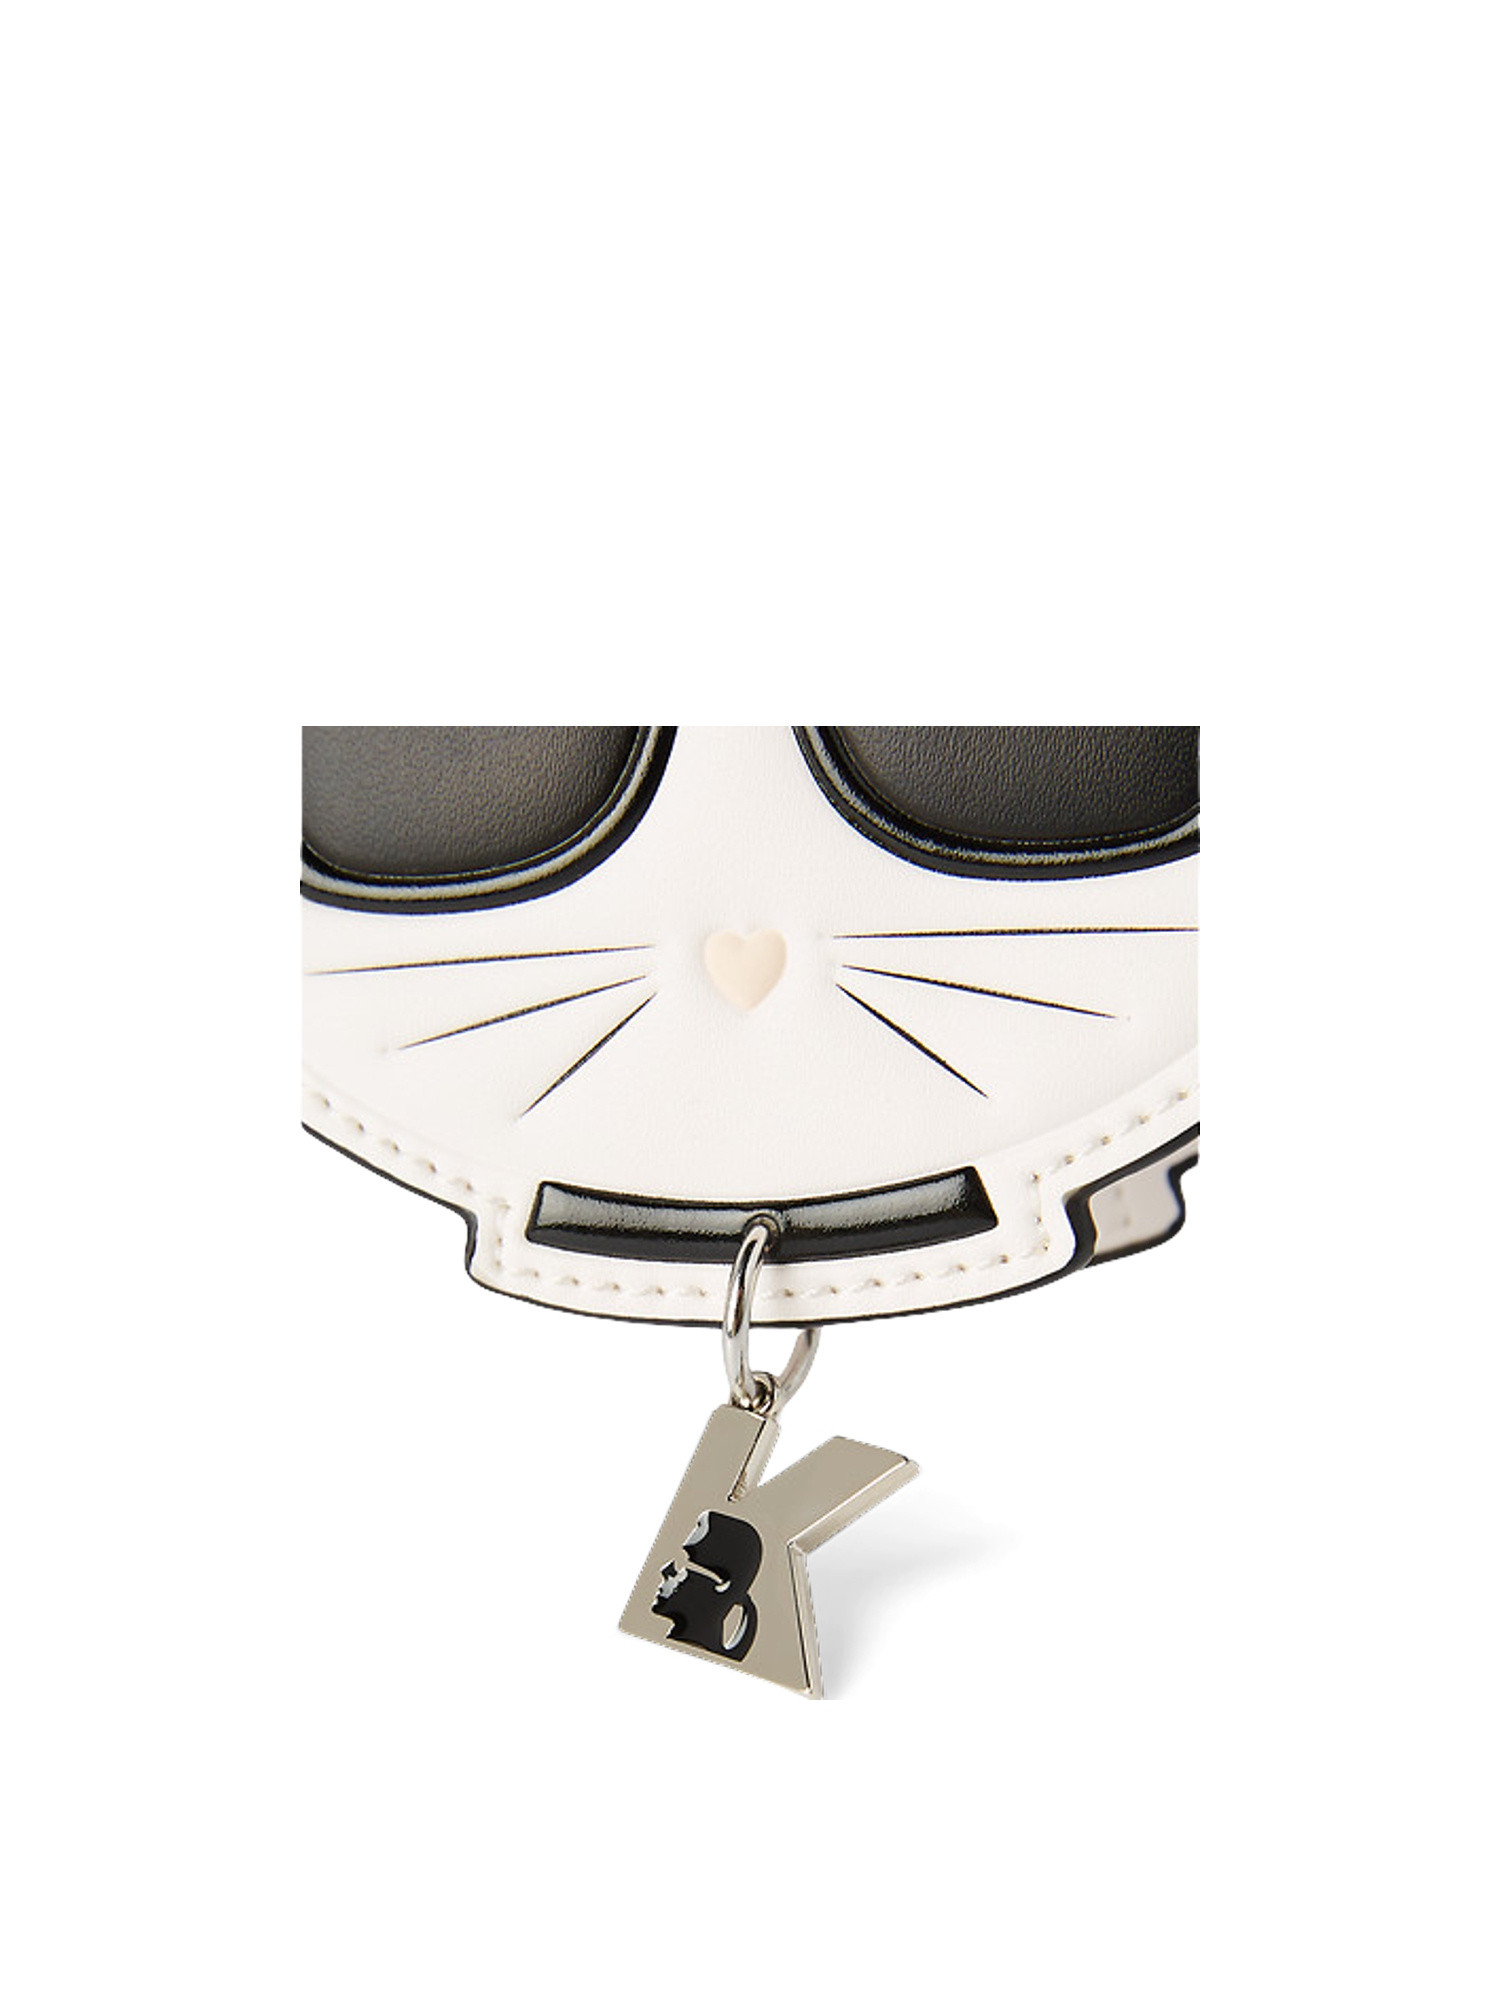 Karl Lagerfeld - K/Choupette Coin Purse, Black, large image number 2